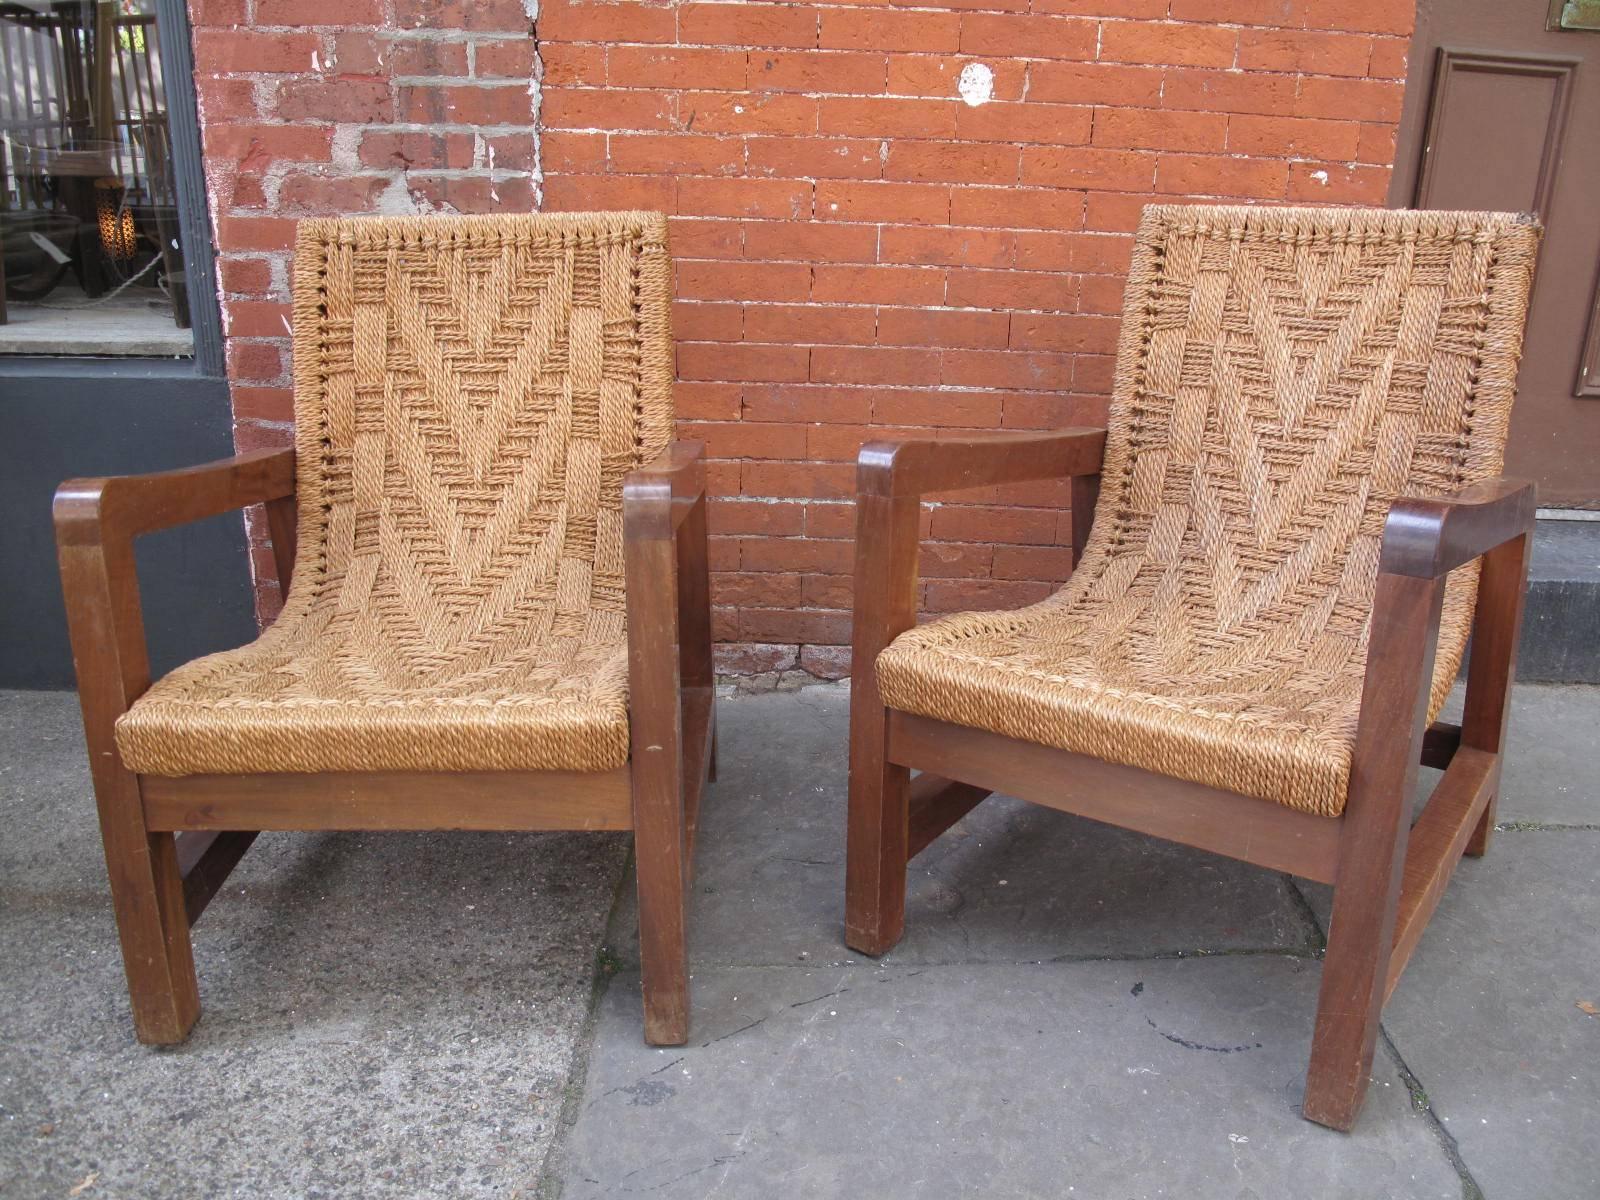 Pair of Armchairs with extremely solid hardwood frame, wrapped fiber seat and back. Made in Guatemala by Tyco.